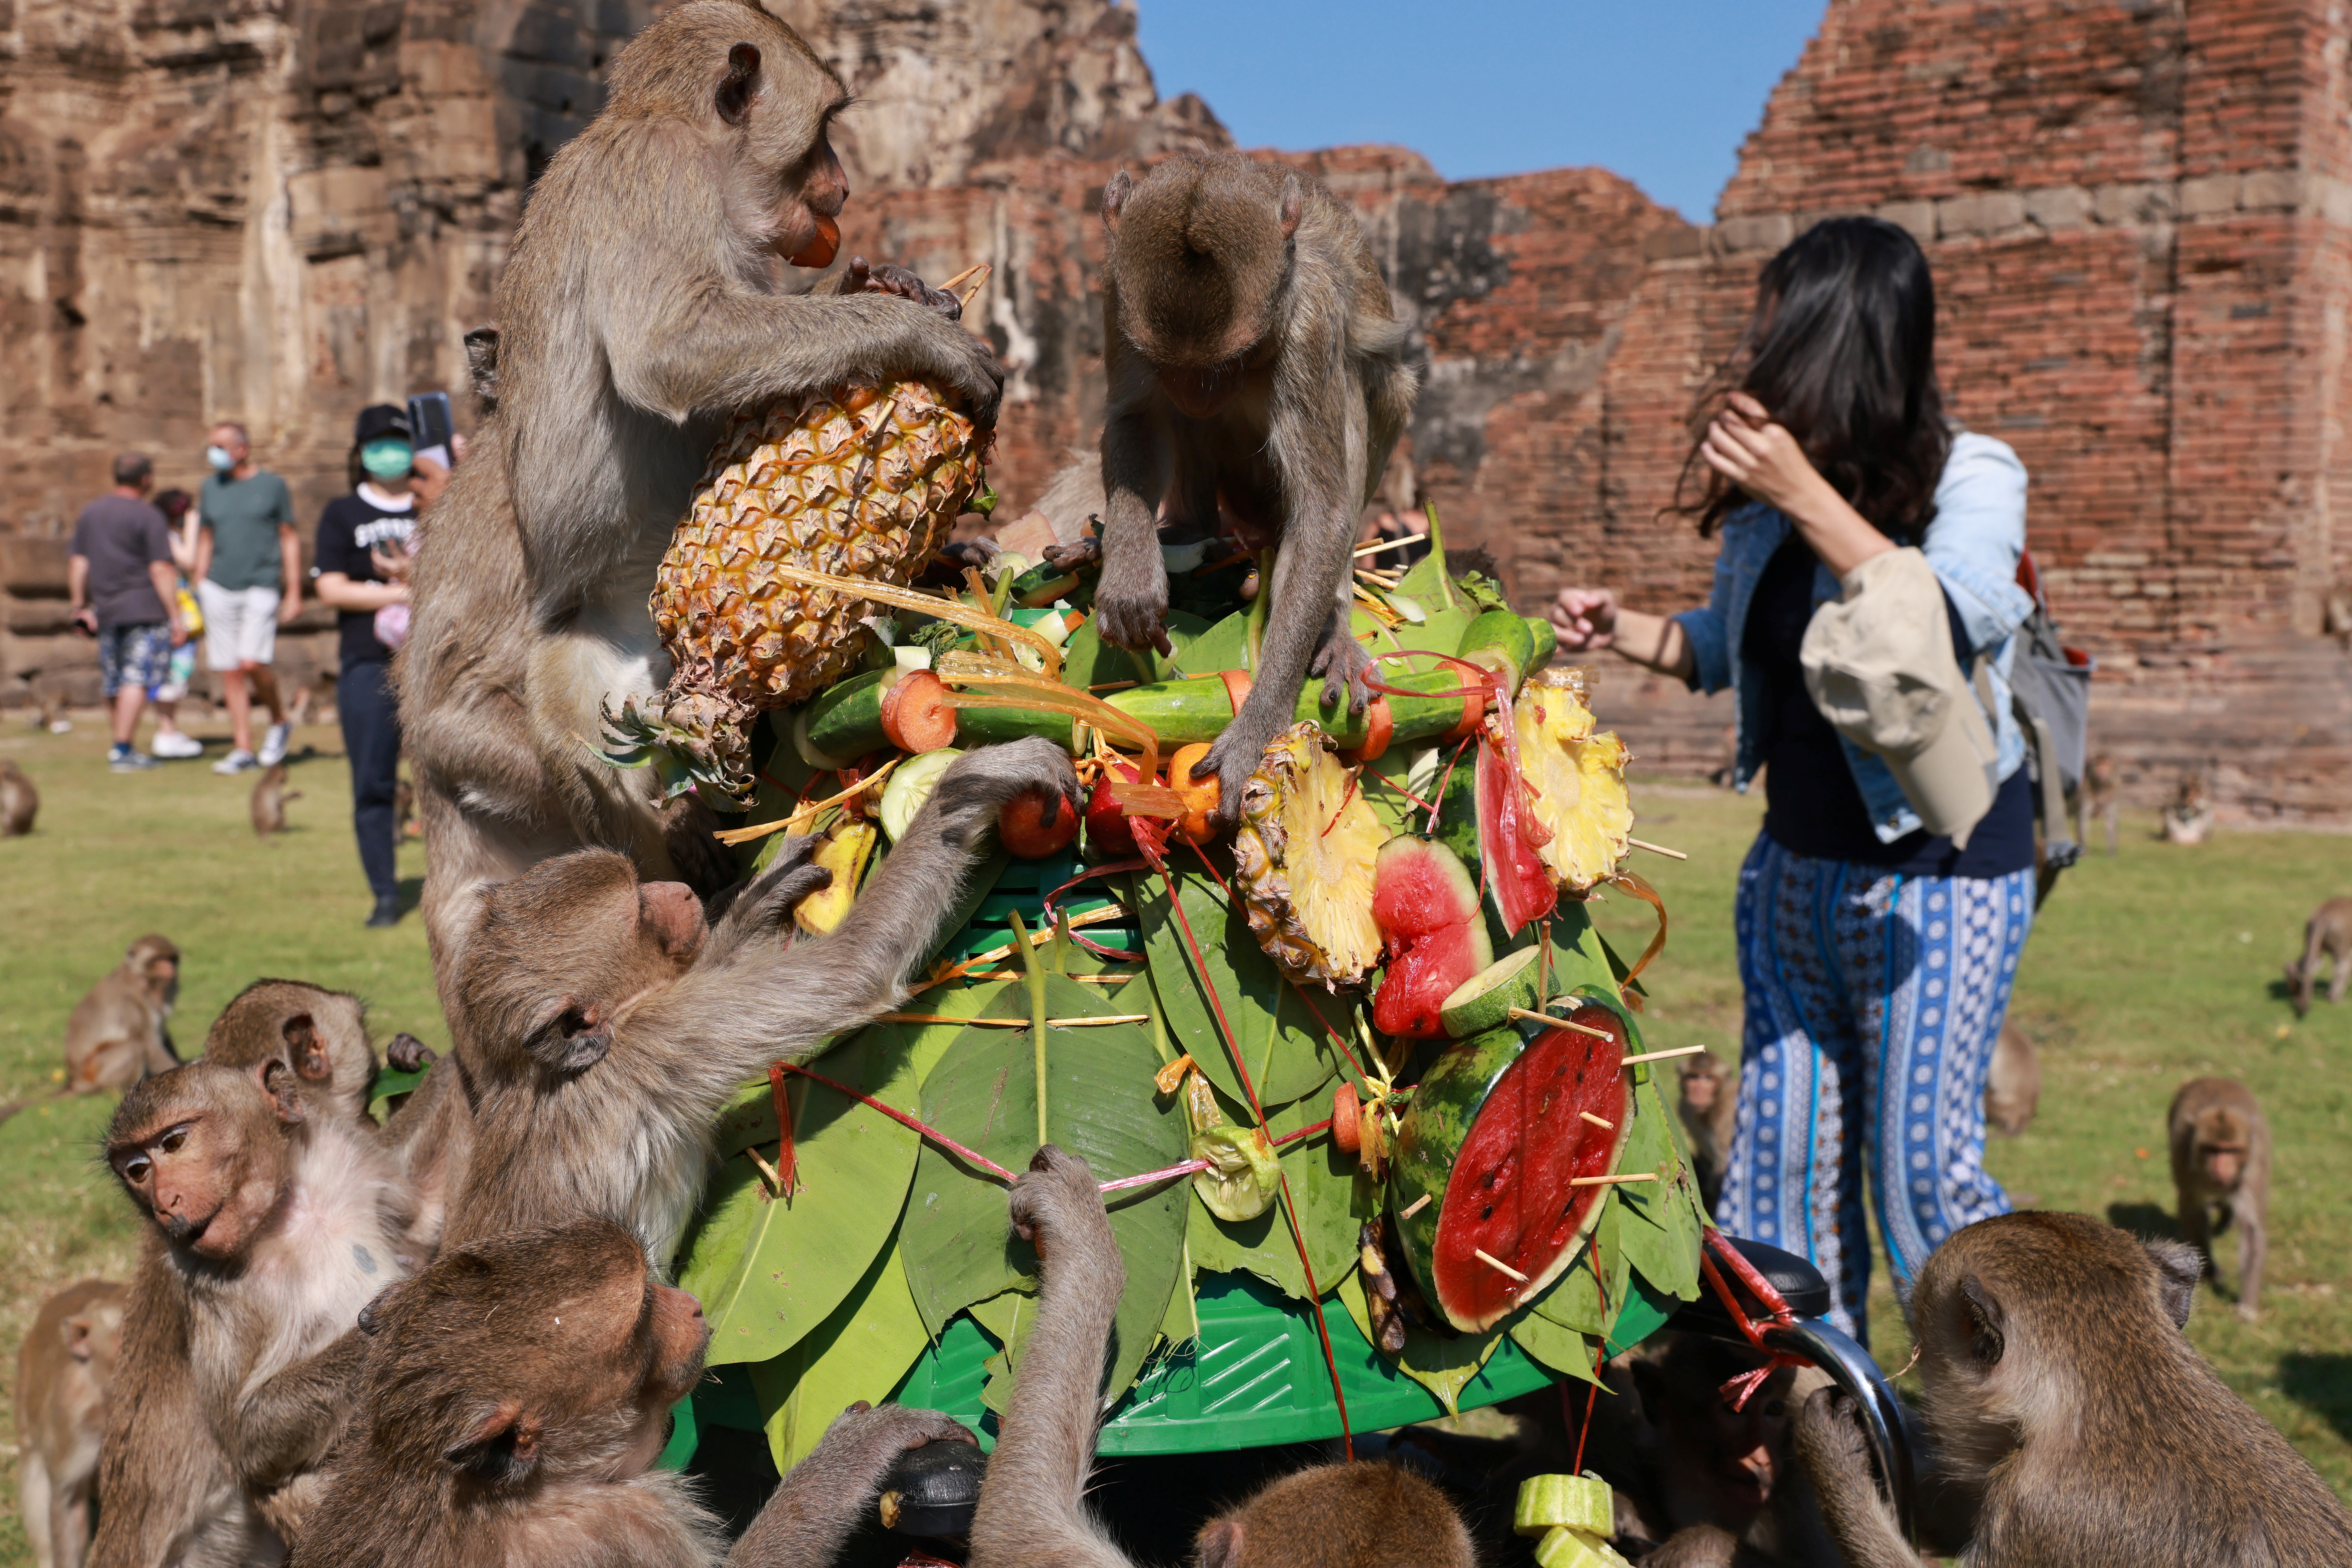 Monkeys eat fruit during the annual Monkey Festival which resumed after a two-year gap caused by  the COVID-19 pandemic, in Lopburi province, Thailand, November 28, 2021. REUTERS/Jiraporn Kuhakan